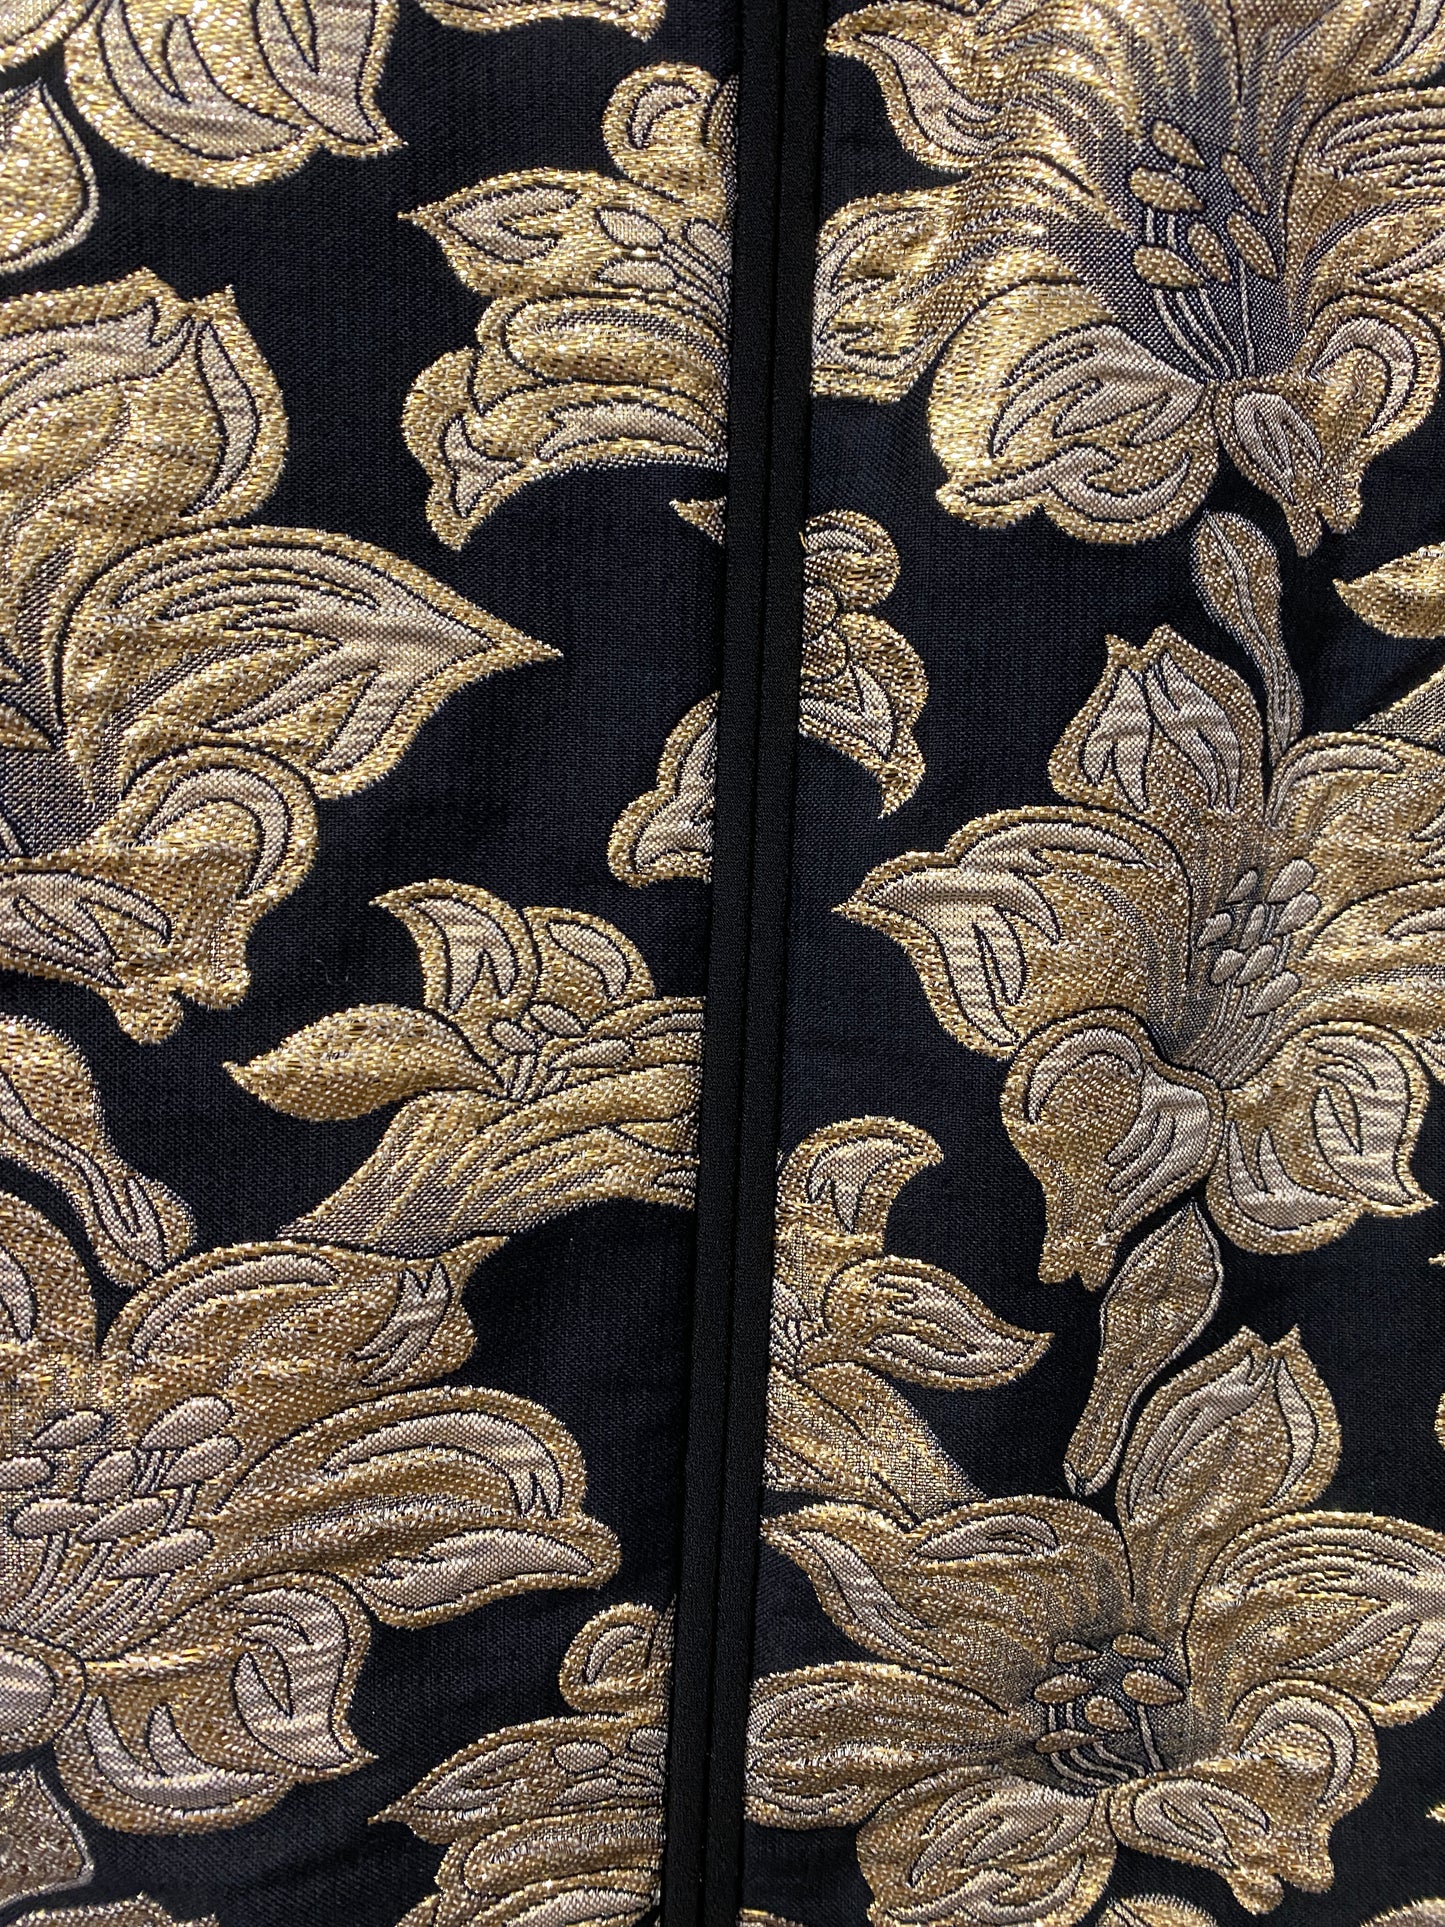 Marni Gold and Black Floral Top 12